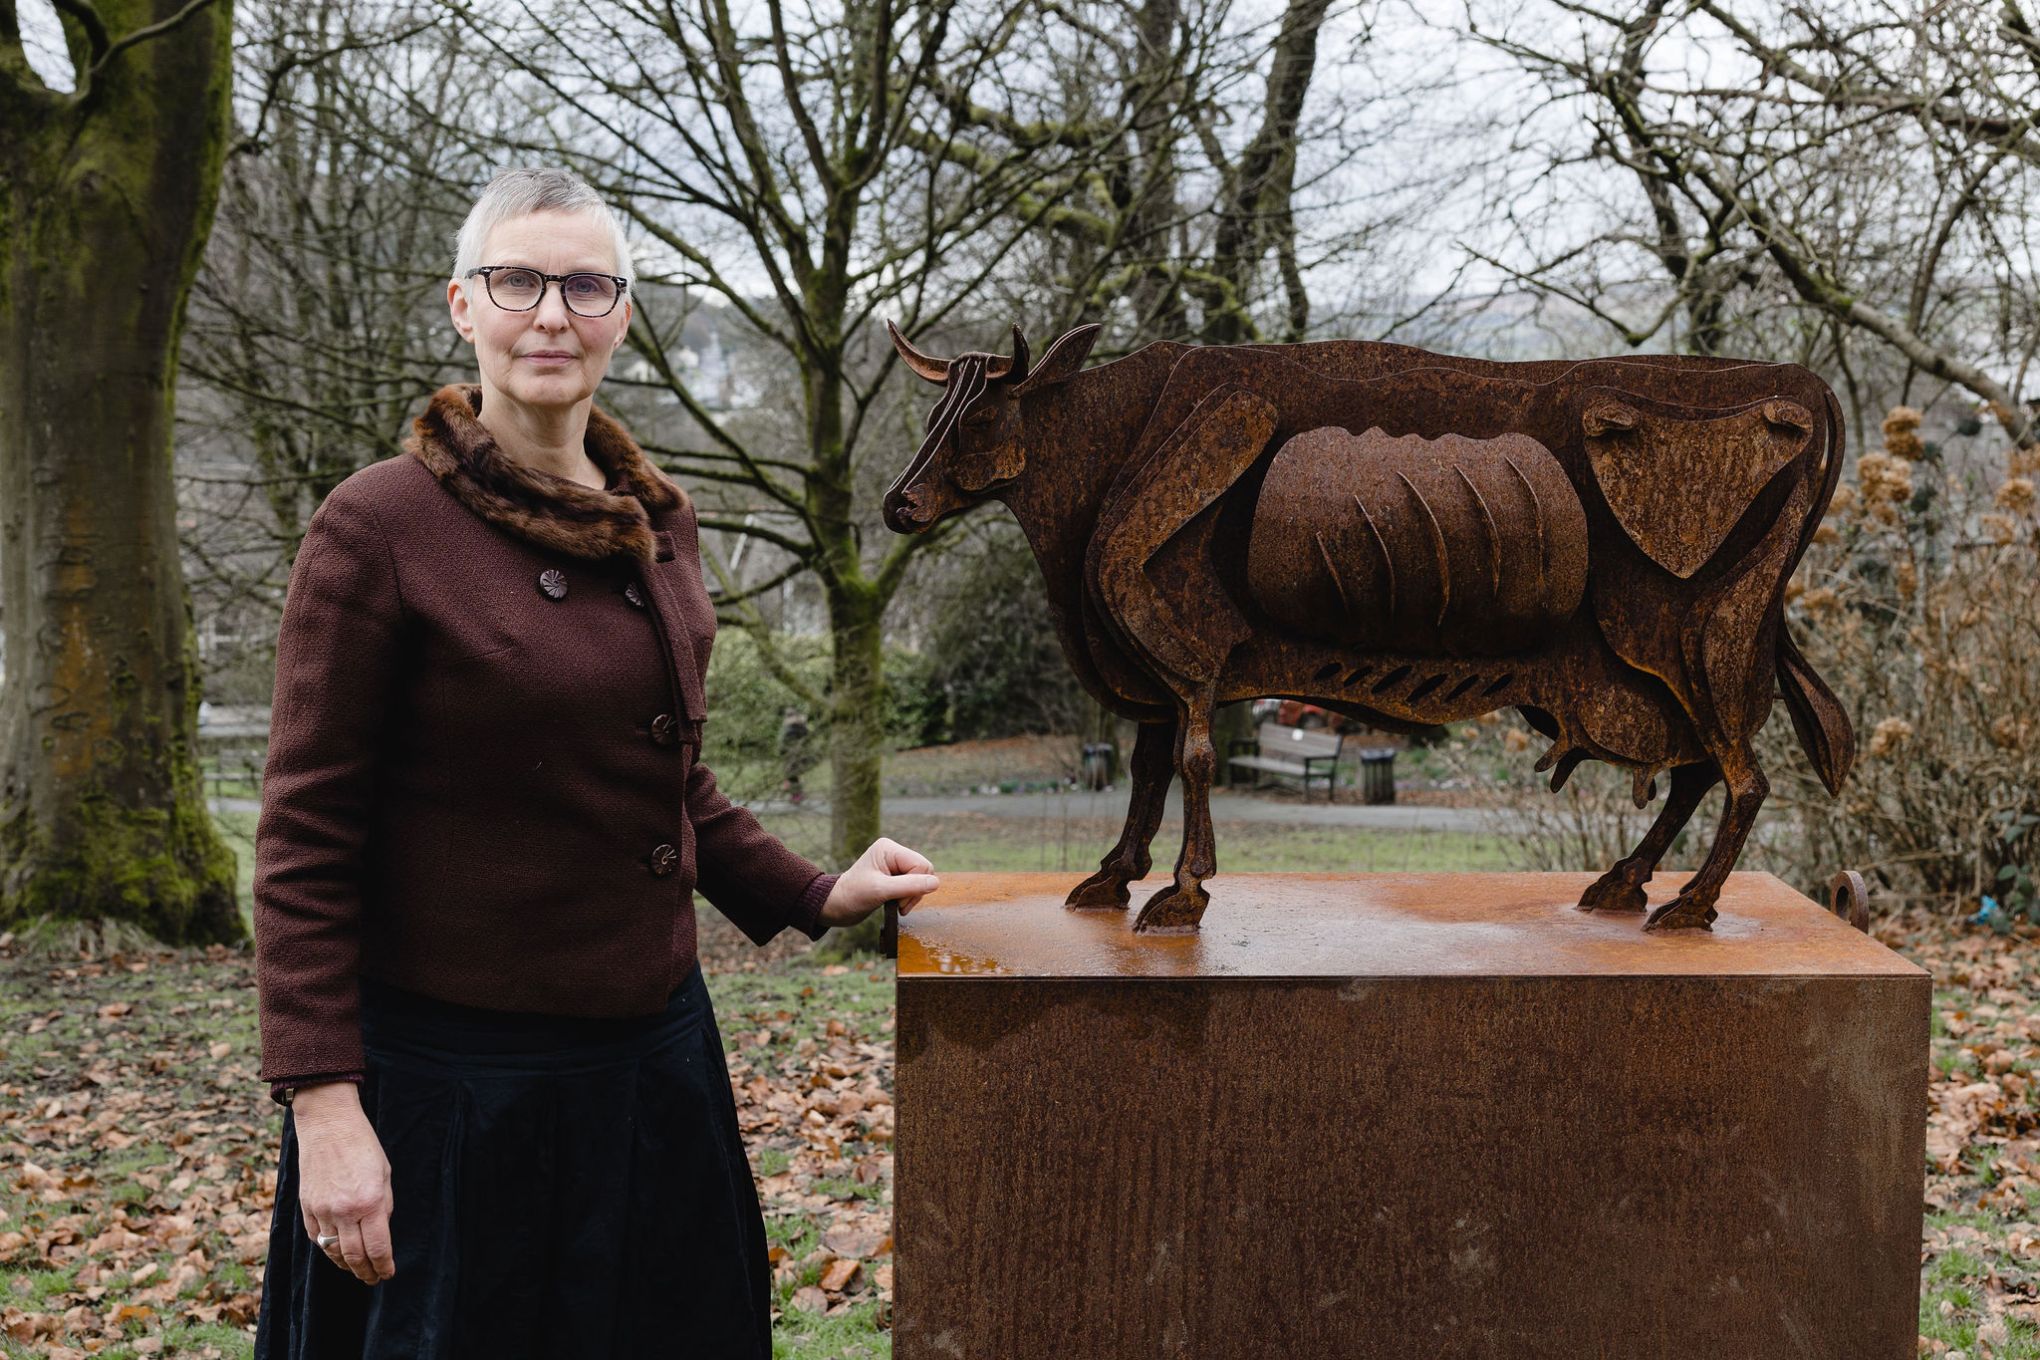 Marjan Wouda with her cow sculpture in the grounds of The Whitaker Museum & Art Gallery. Image by Christina Davies, Fish2Photo.